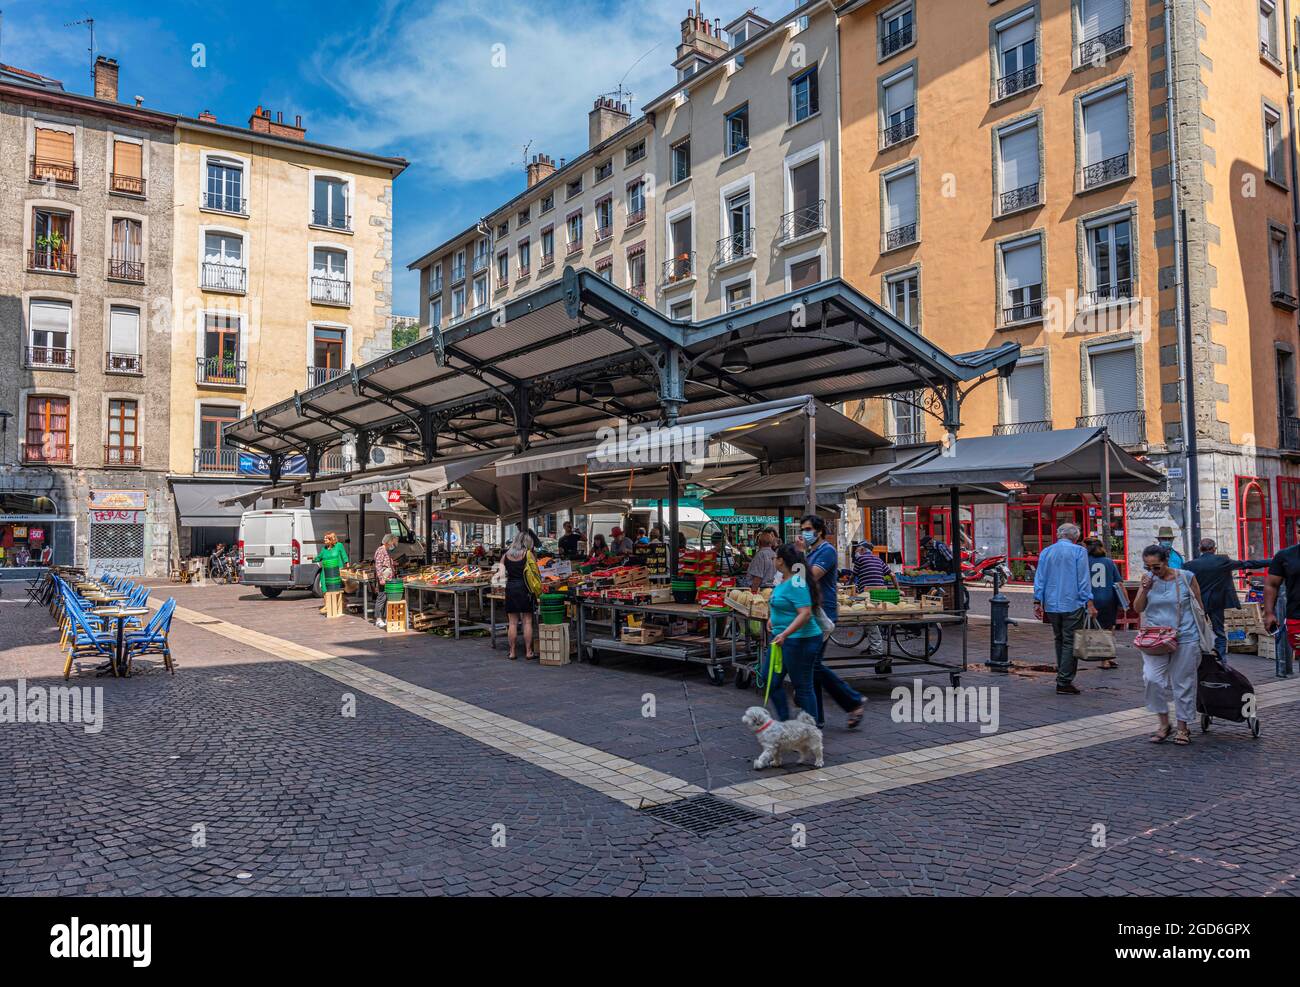 local fruit and vegetable stalls for sale in place aux herbes, market in the heart of the city of Grenoble. Grenoble, France Stock Photo